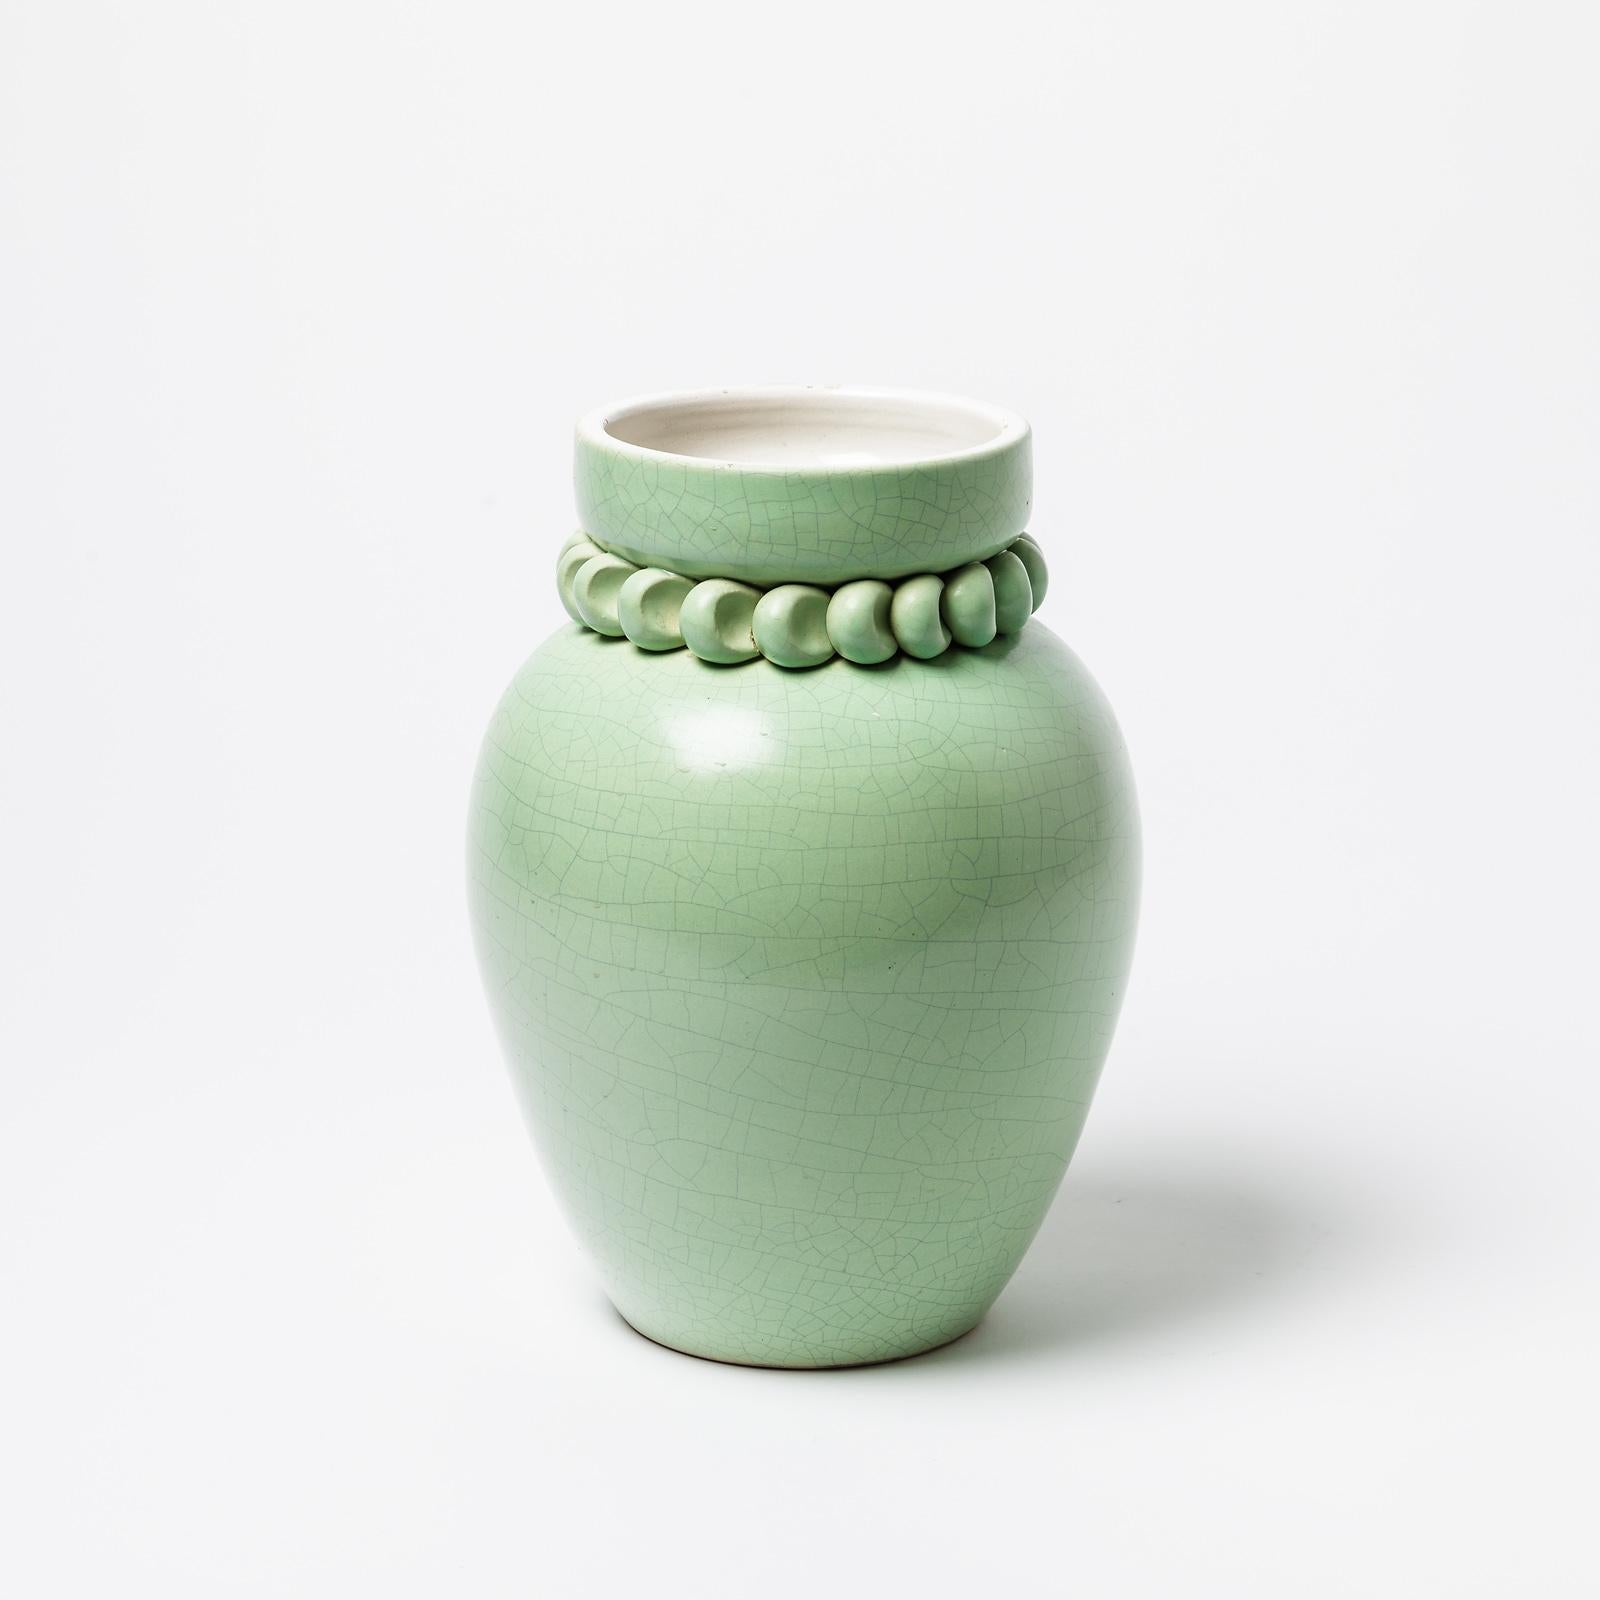 A ceramic vase by Pol Chambost with green and white glaze decoration.
Perfect original conditions.
Signed under the base 